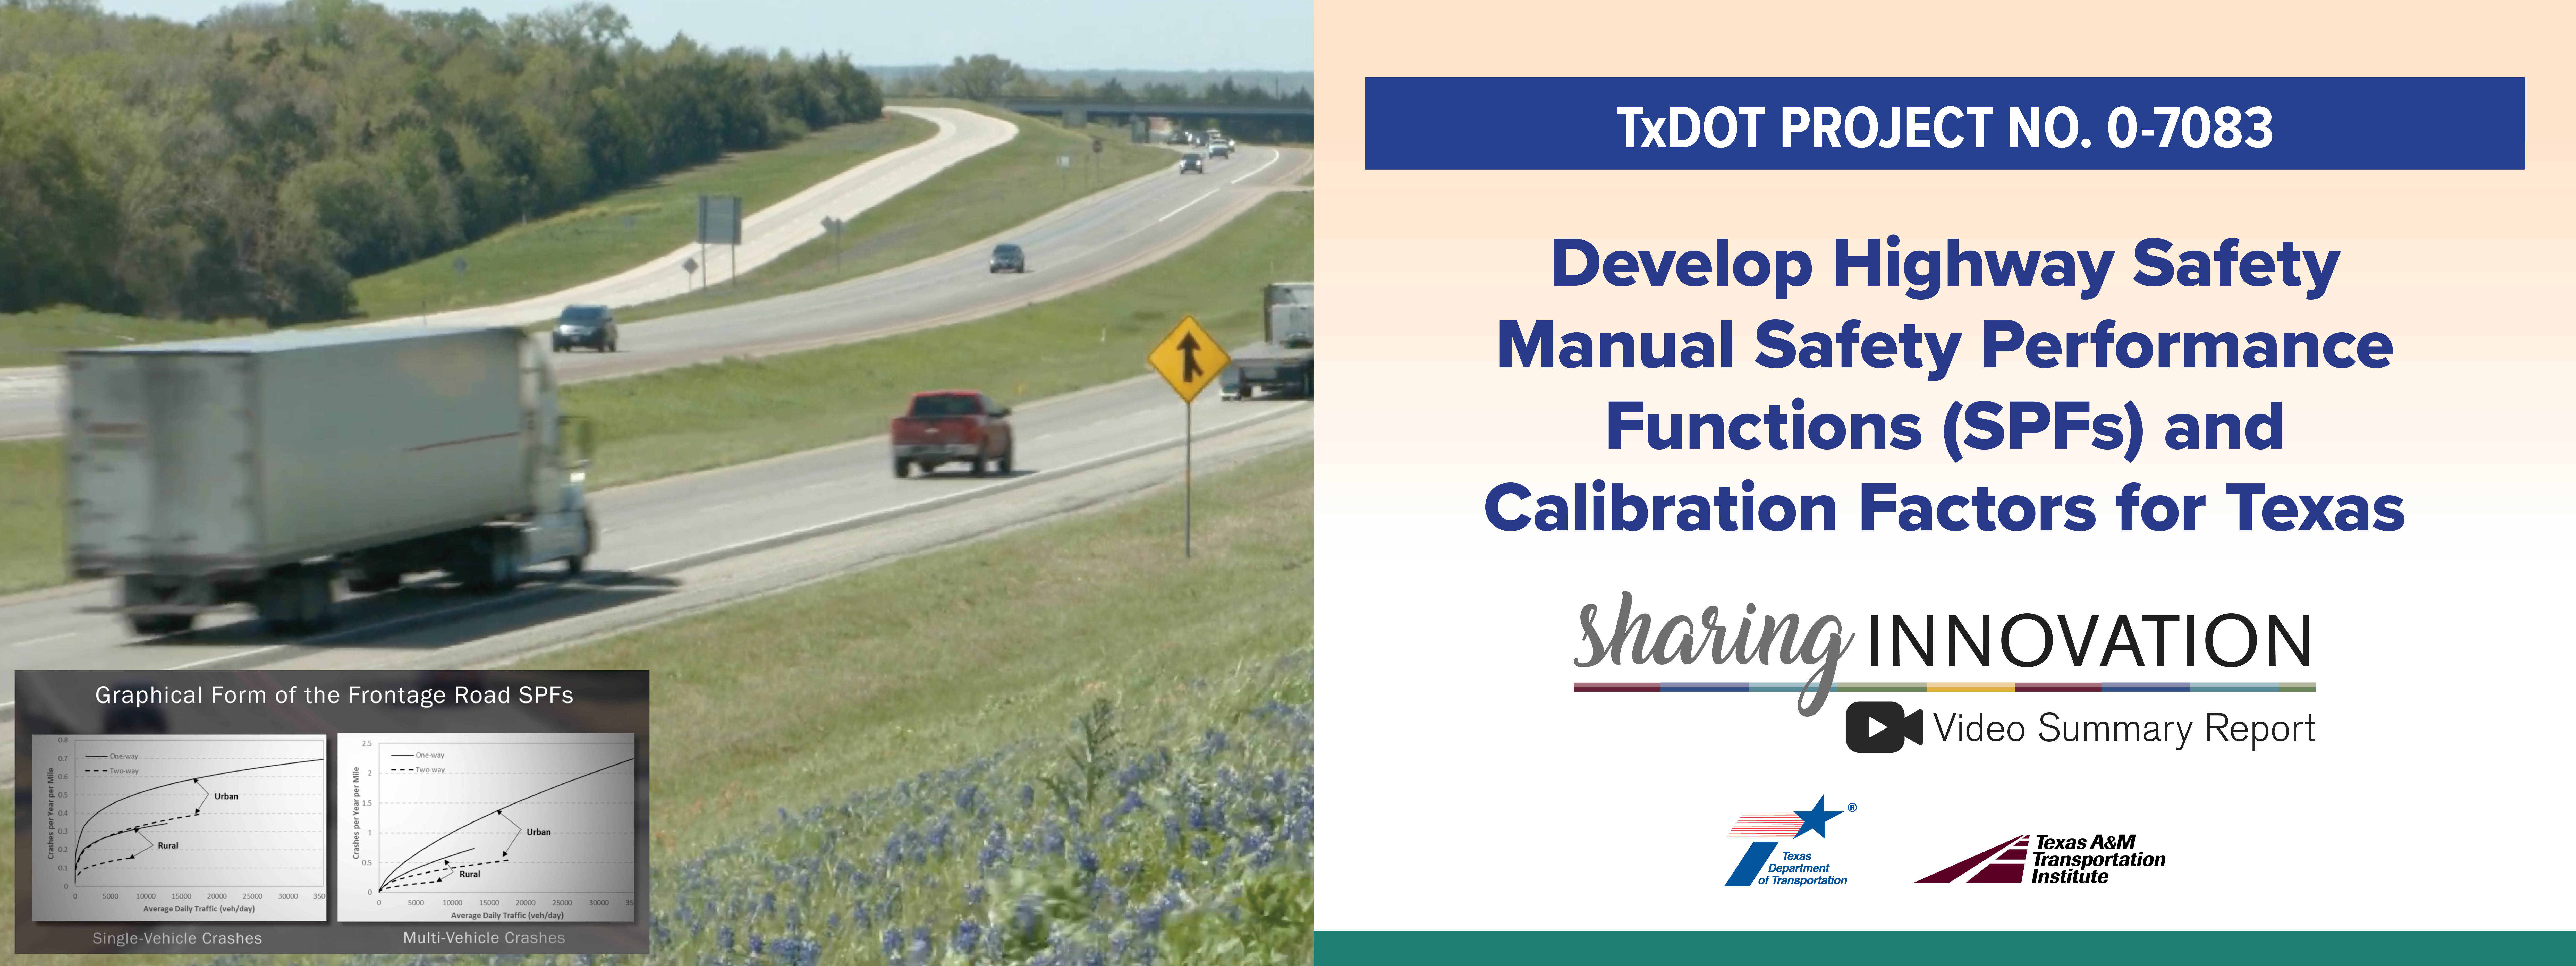 Sharing Innovation Video Summary Report: Develop Highway Safety Manual Safety Performance Functions (SPFs) and Calibration Factors for Texas